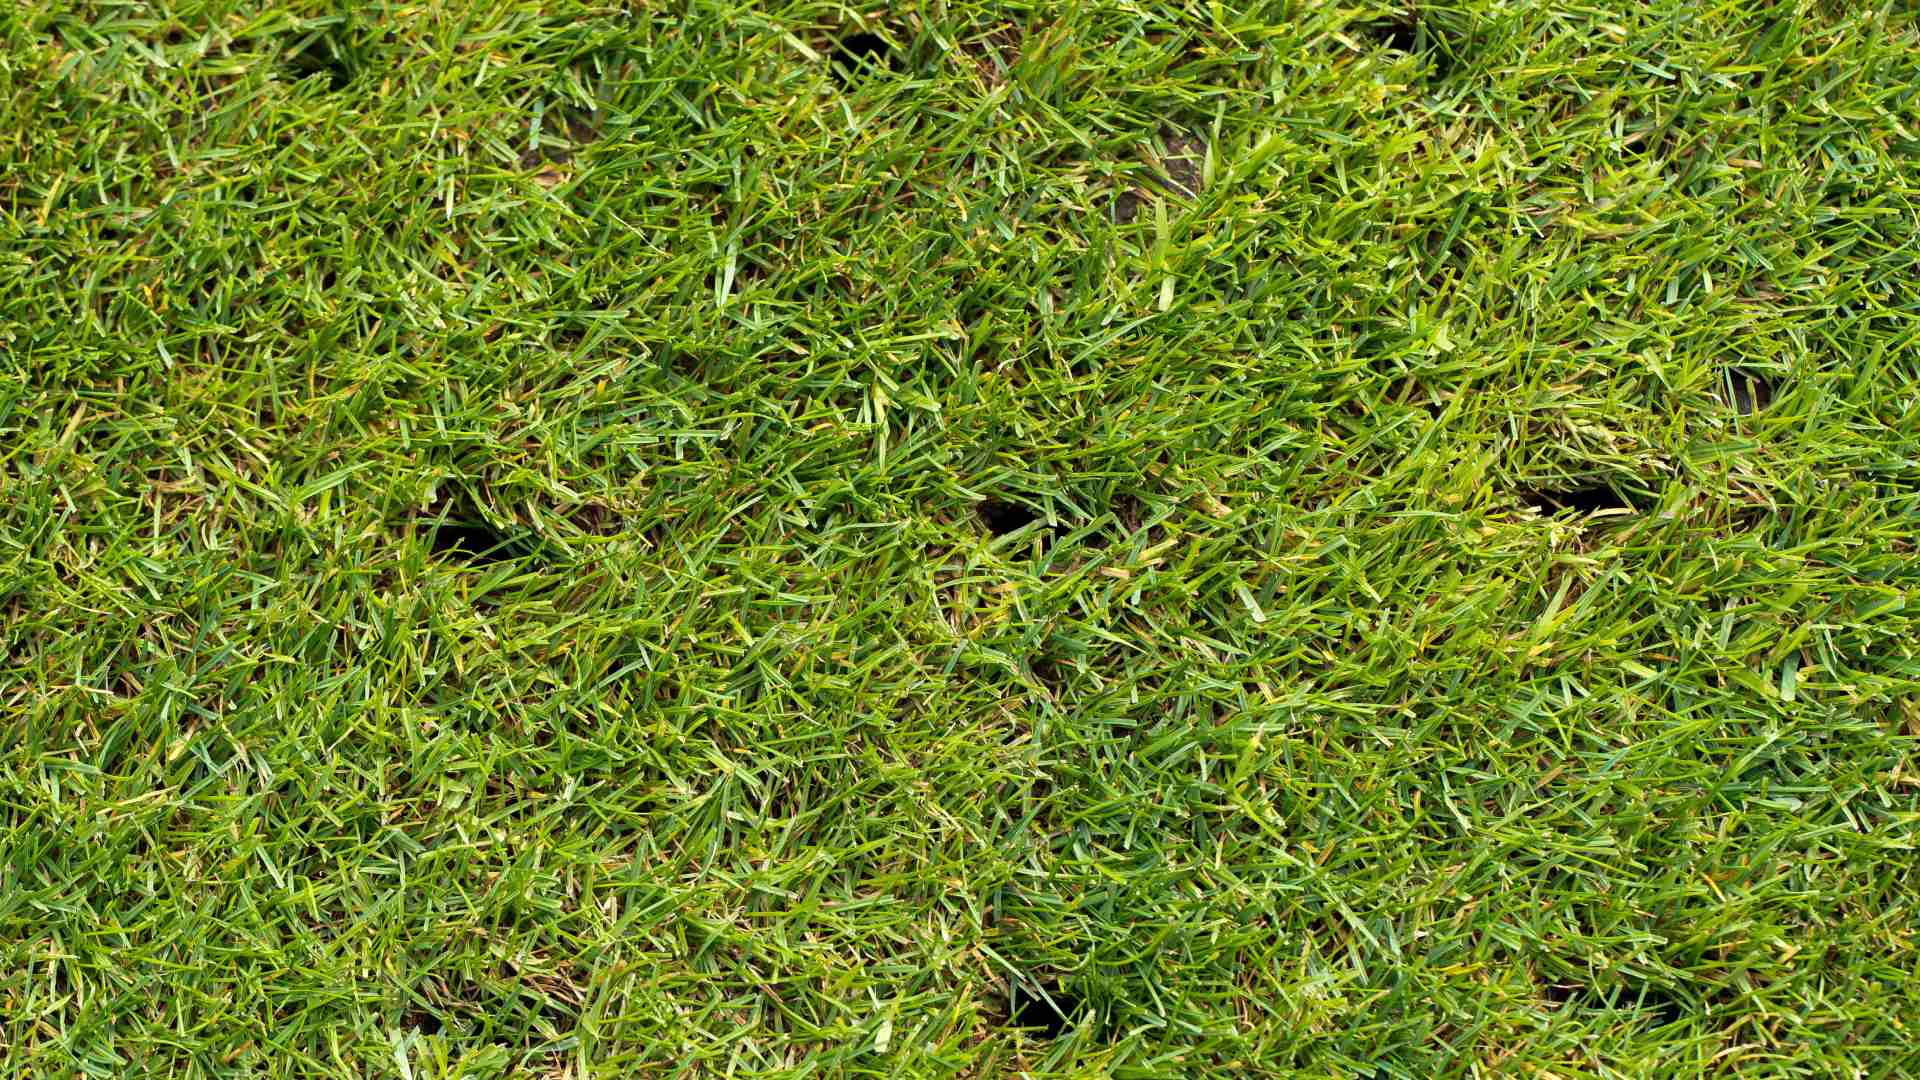 Can Aeration Bring My Lawn Back from the Brink?